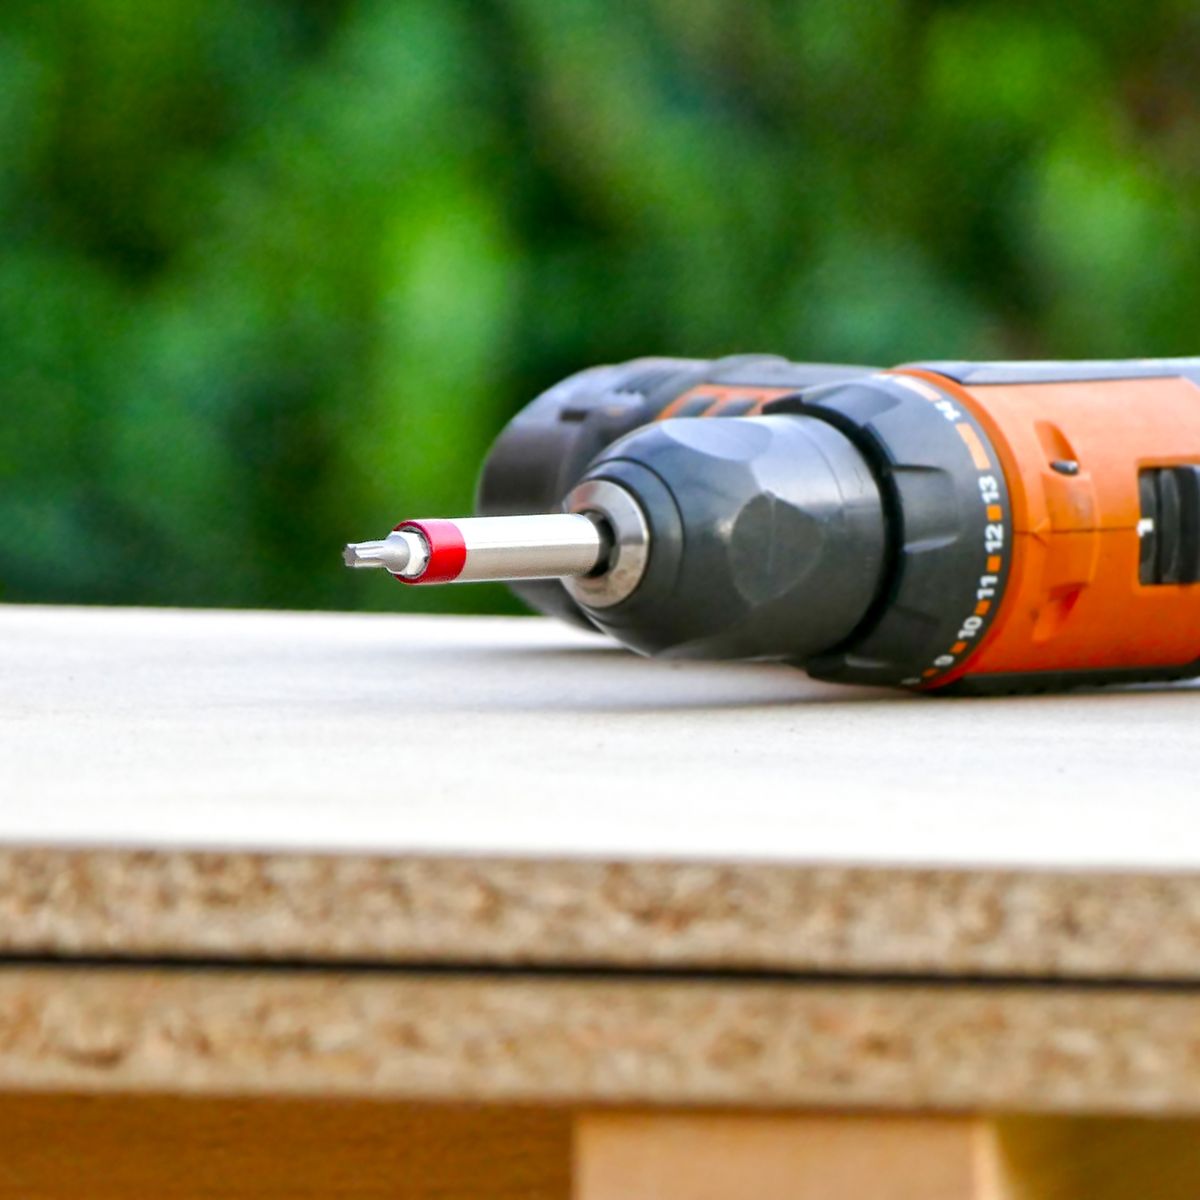 Black & Decker [no Longer Available] 12v Cordless Drill Charger